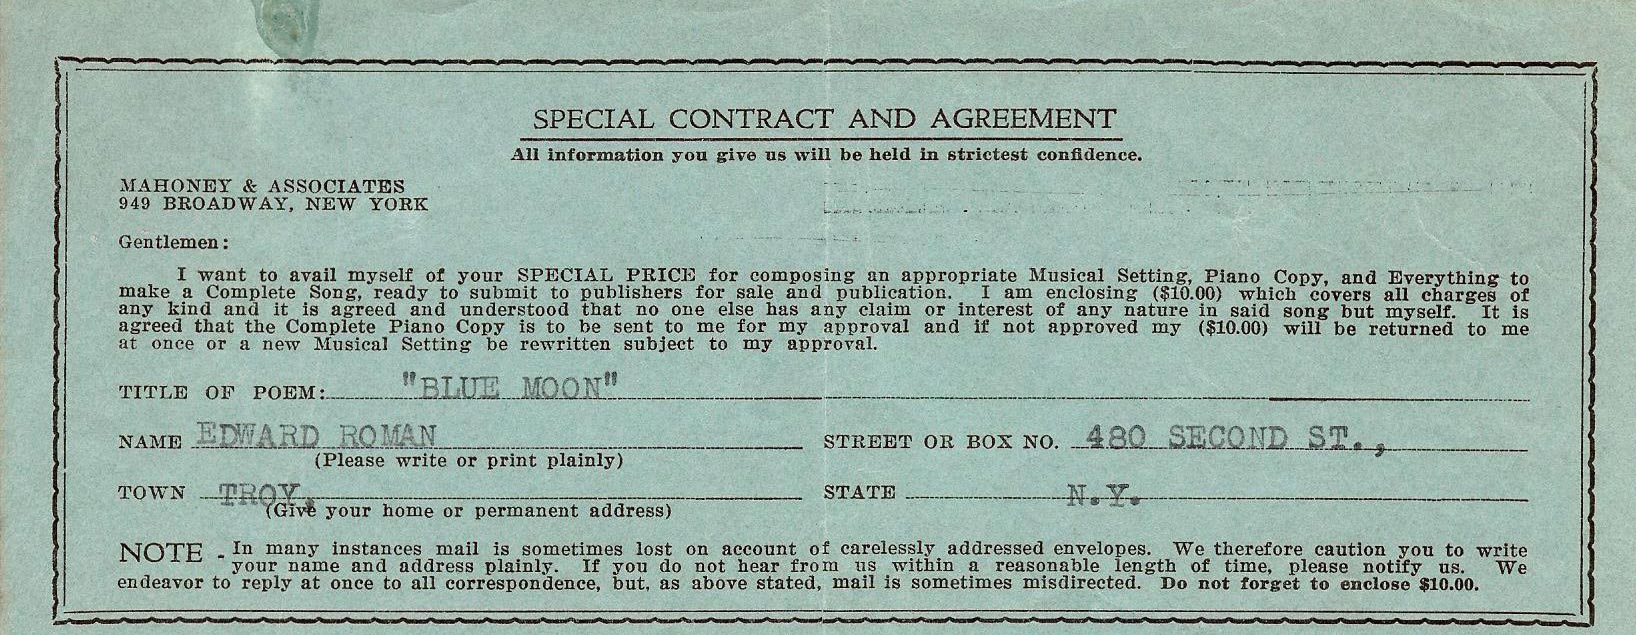 Agent Contract For The Song Blue Moon